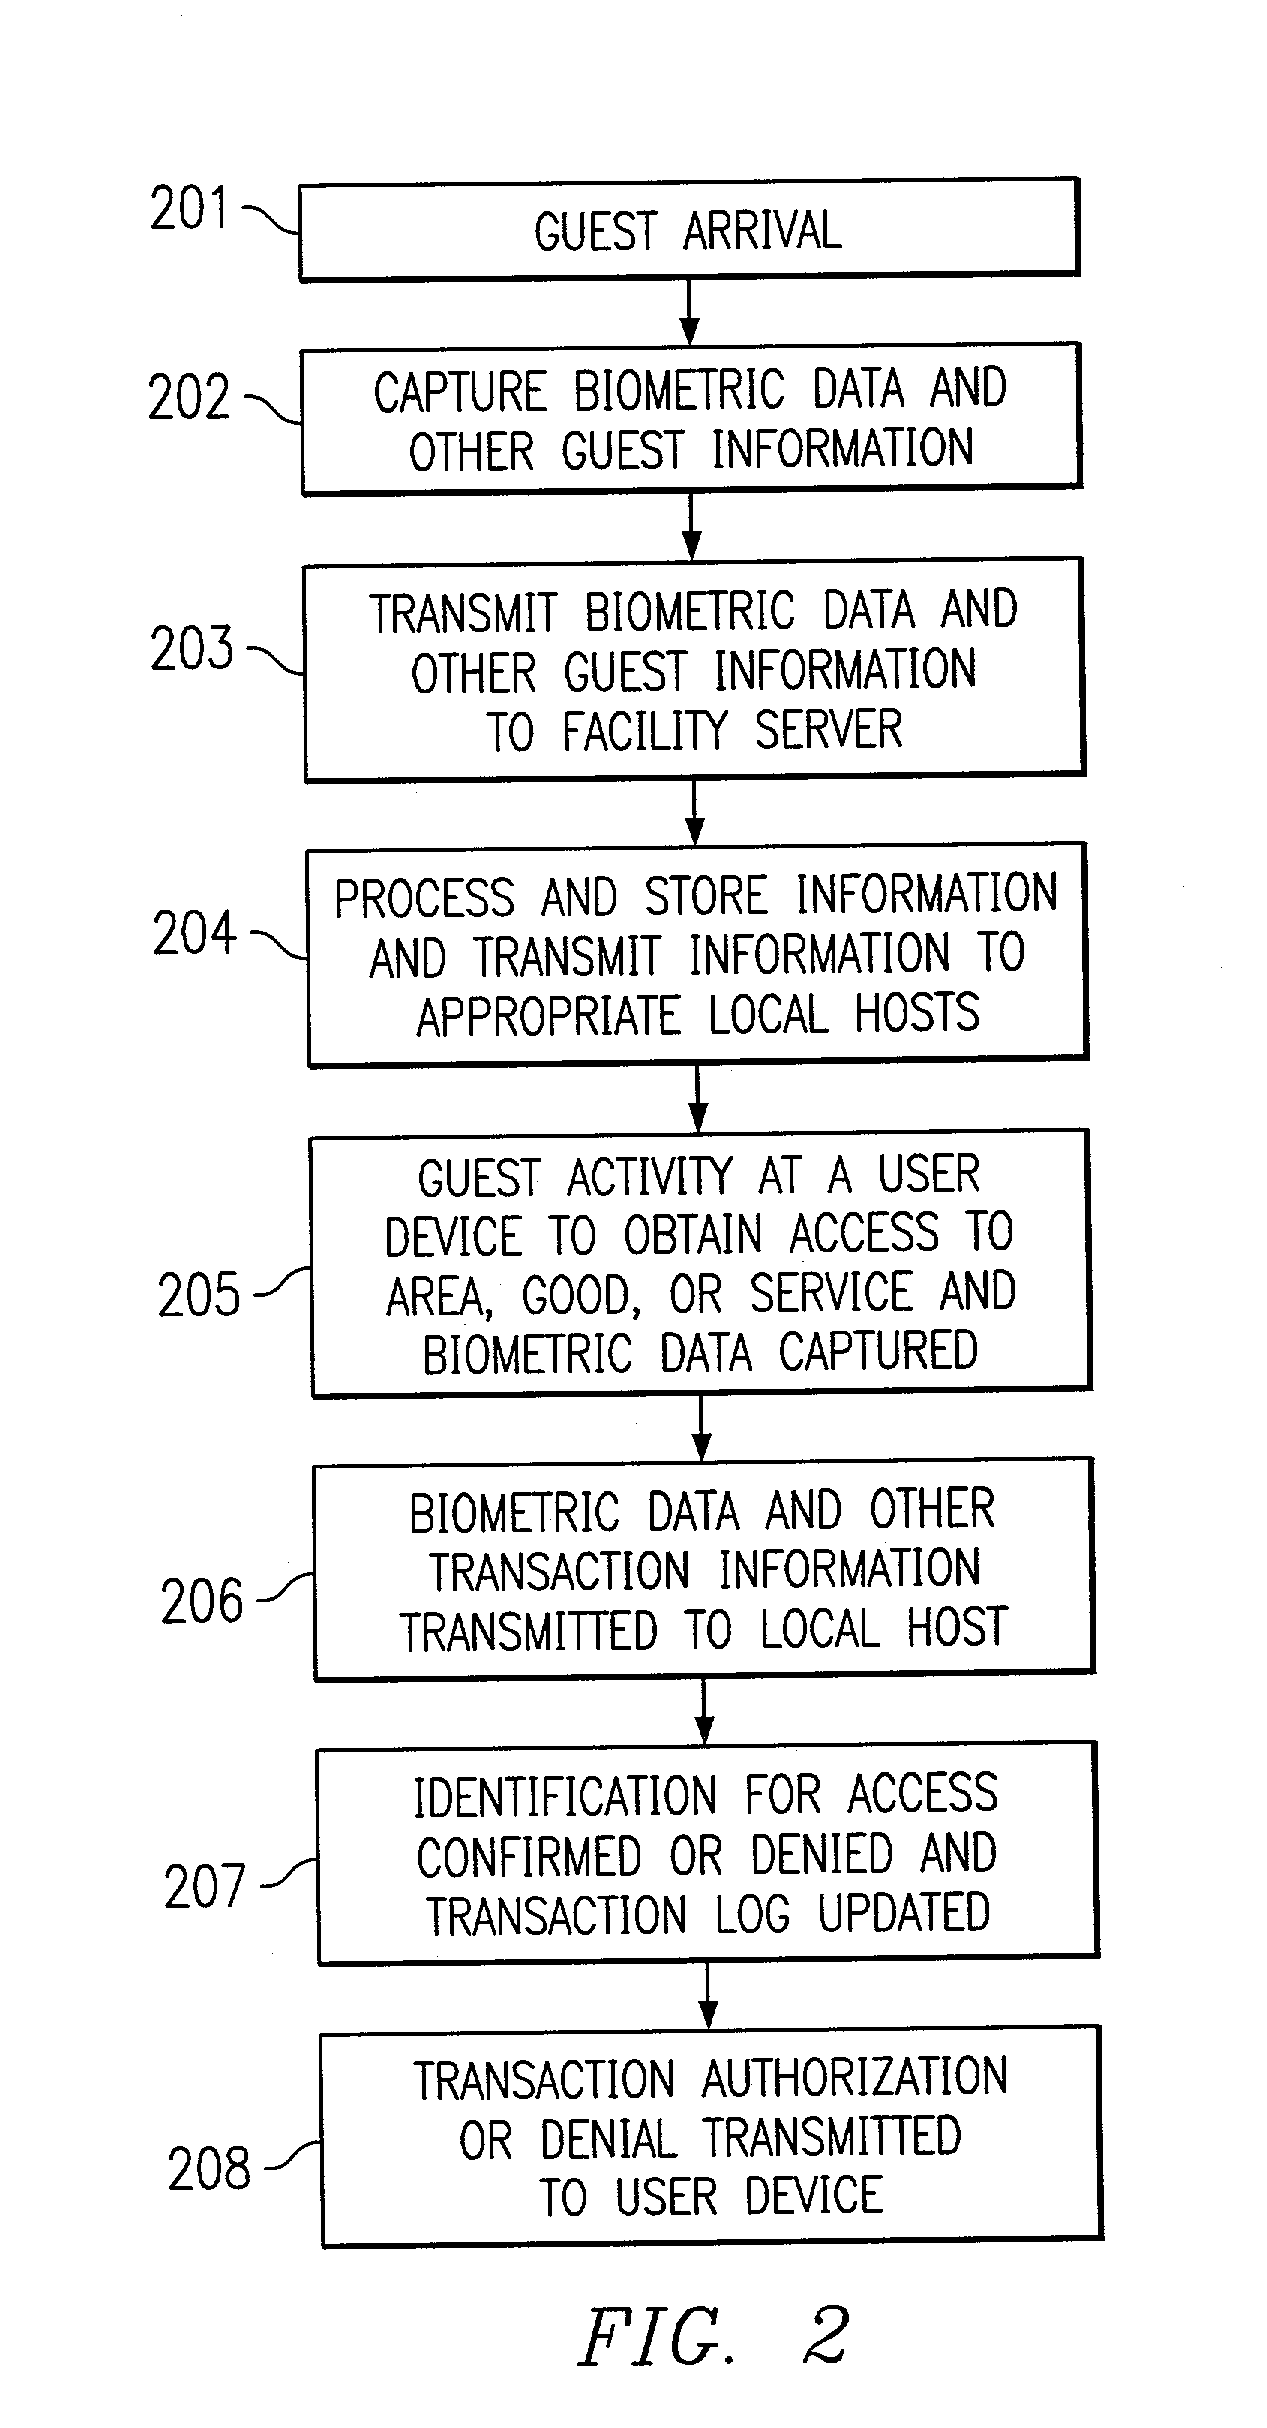 System and method for using biometric data for providing identification, security, access and access records